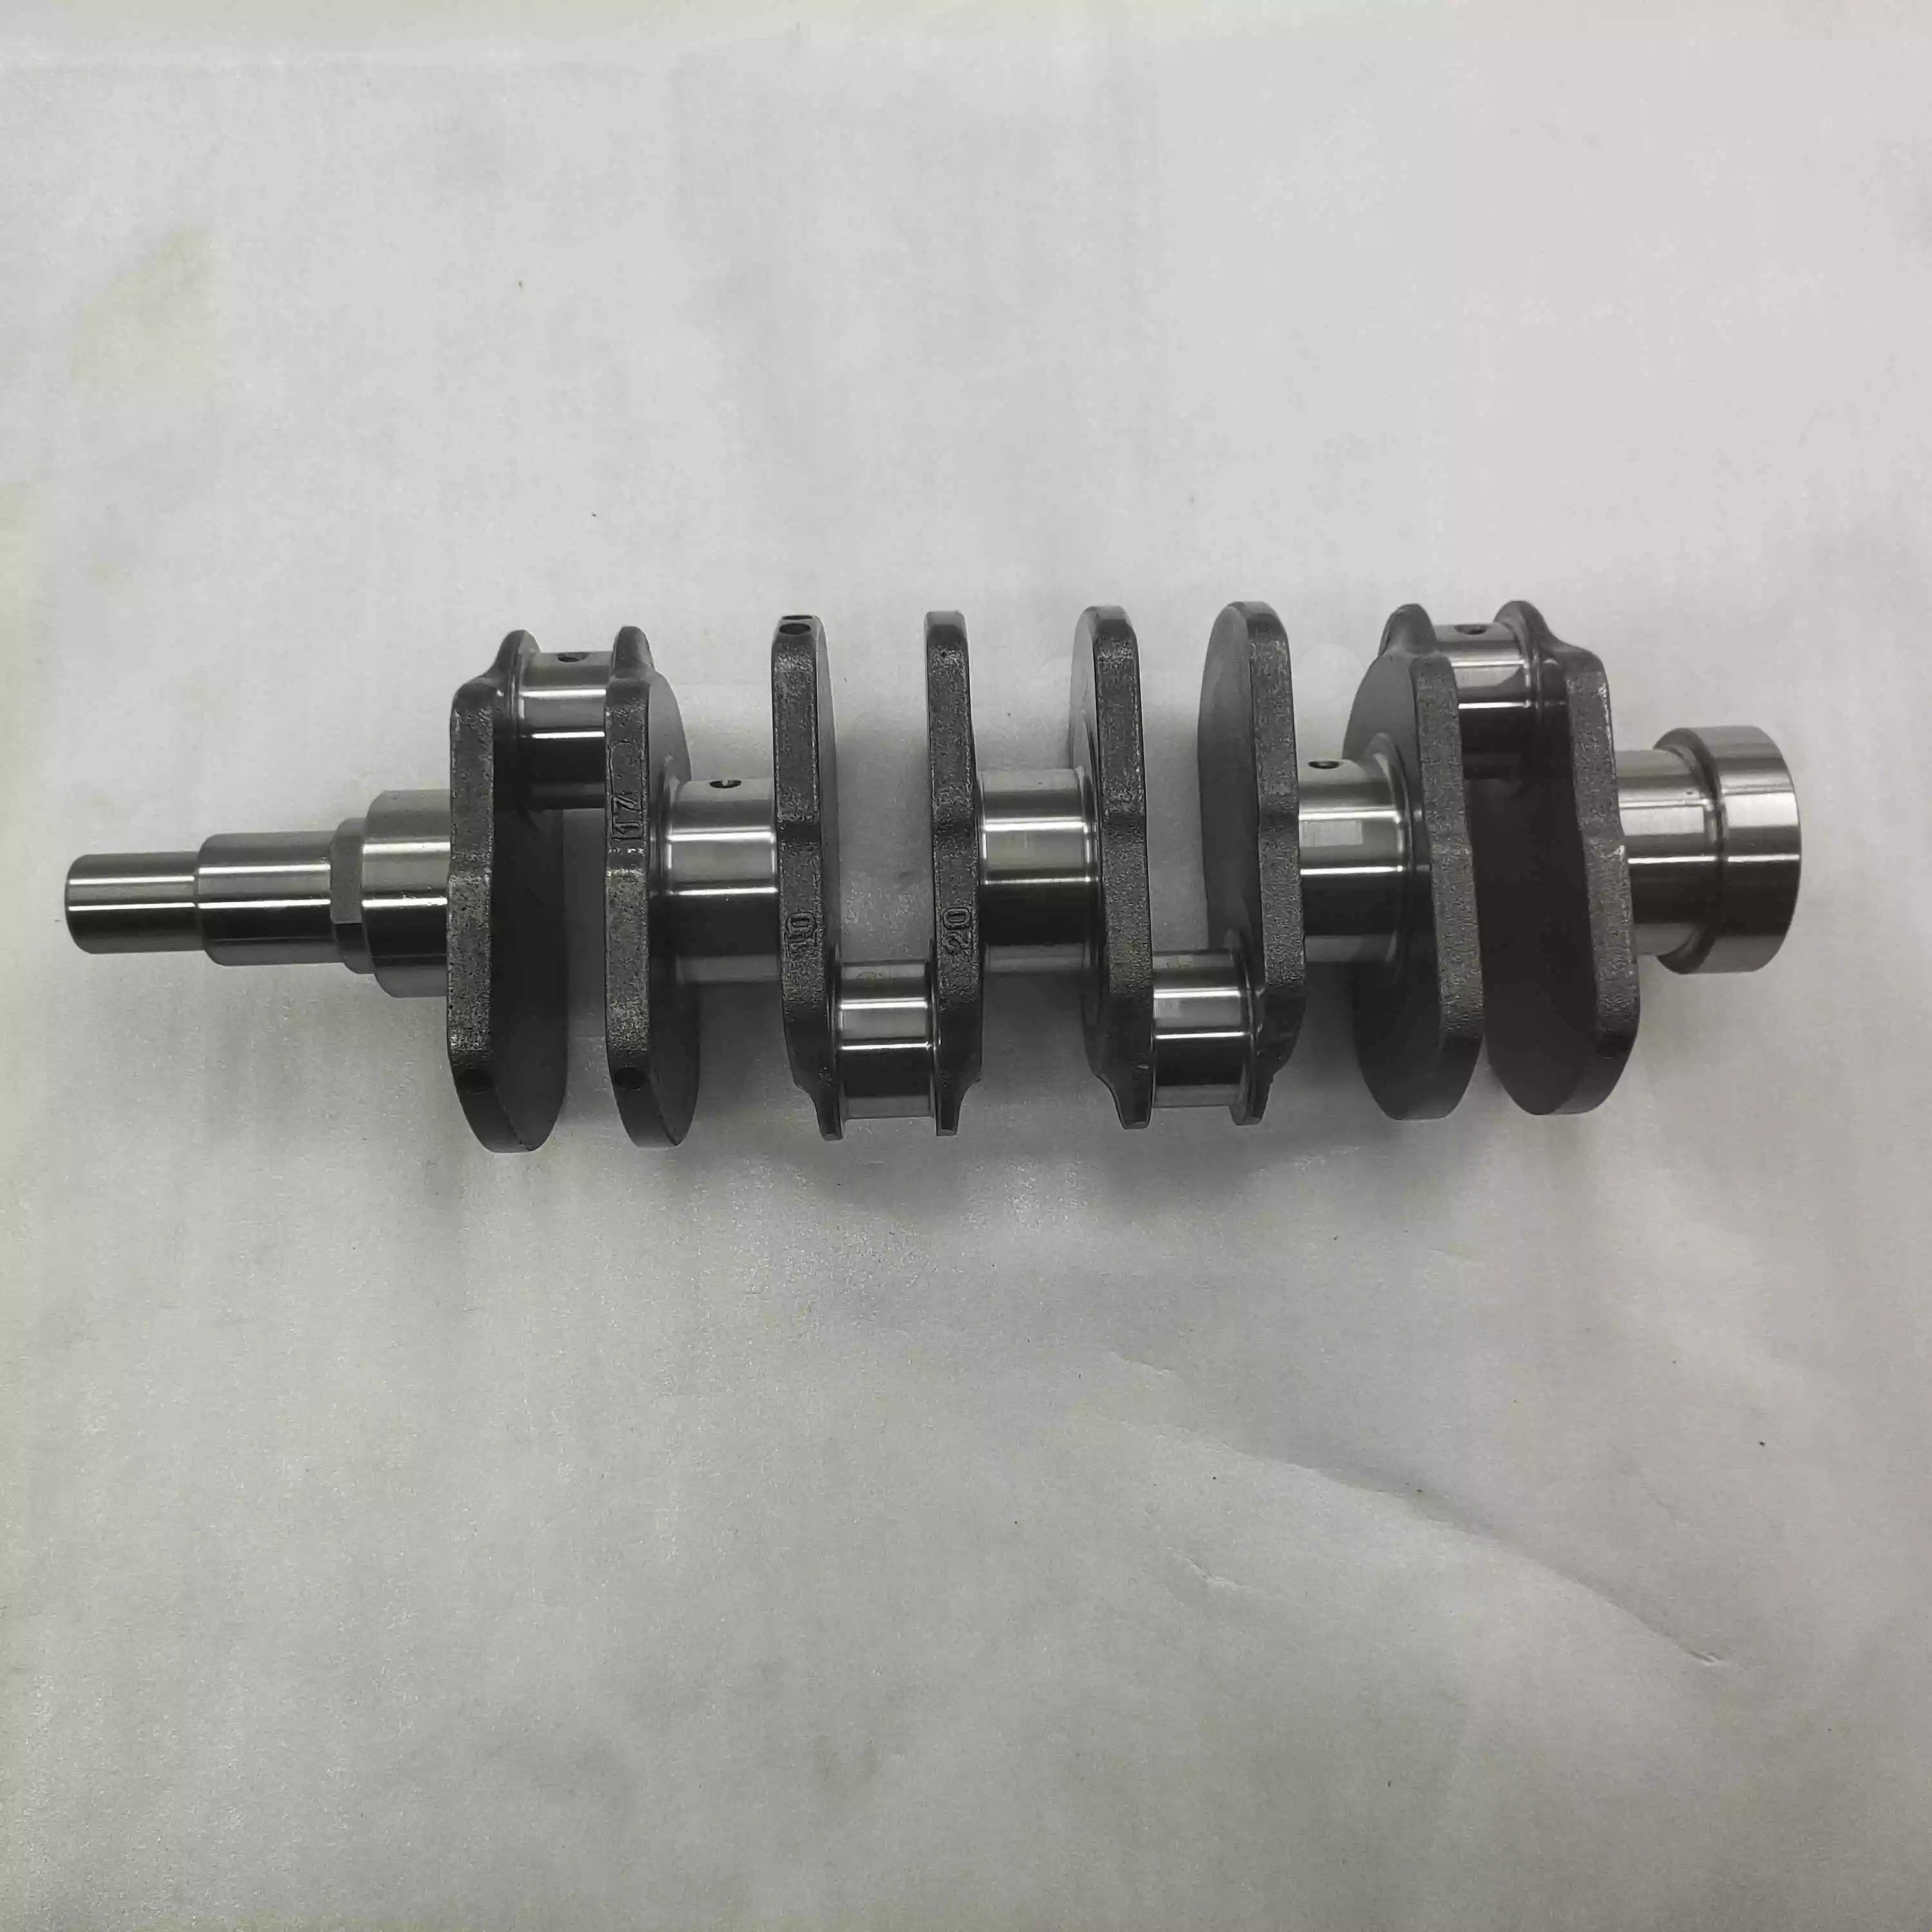 China factory new original motorcycle automobile parts tricycle 800cc water-cooled engine crankshaft high warranty product